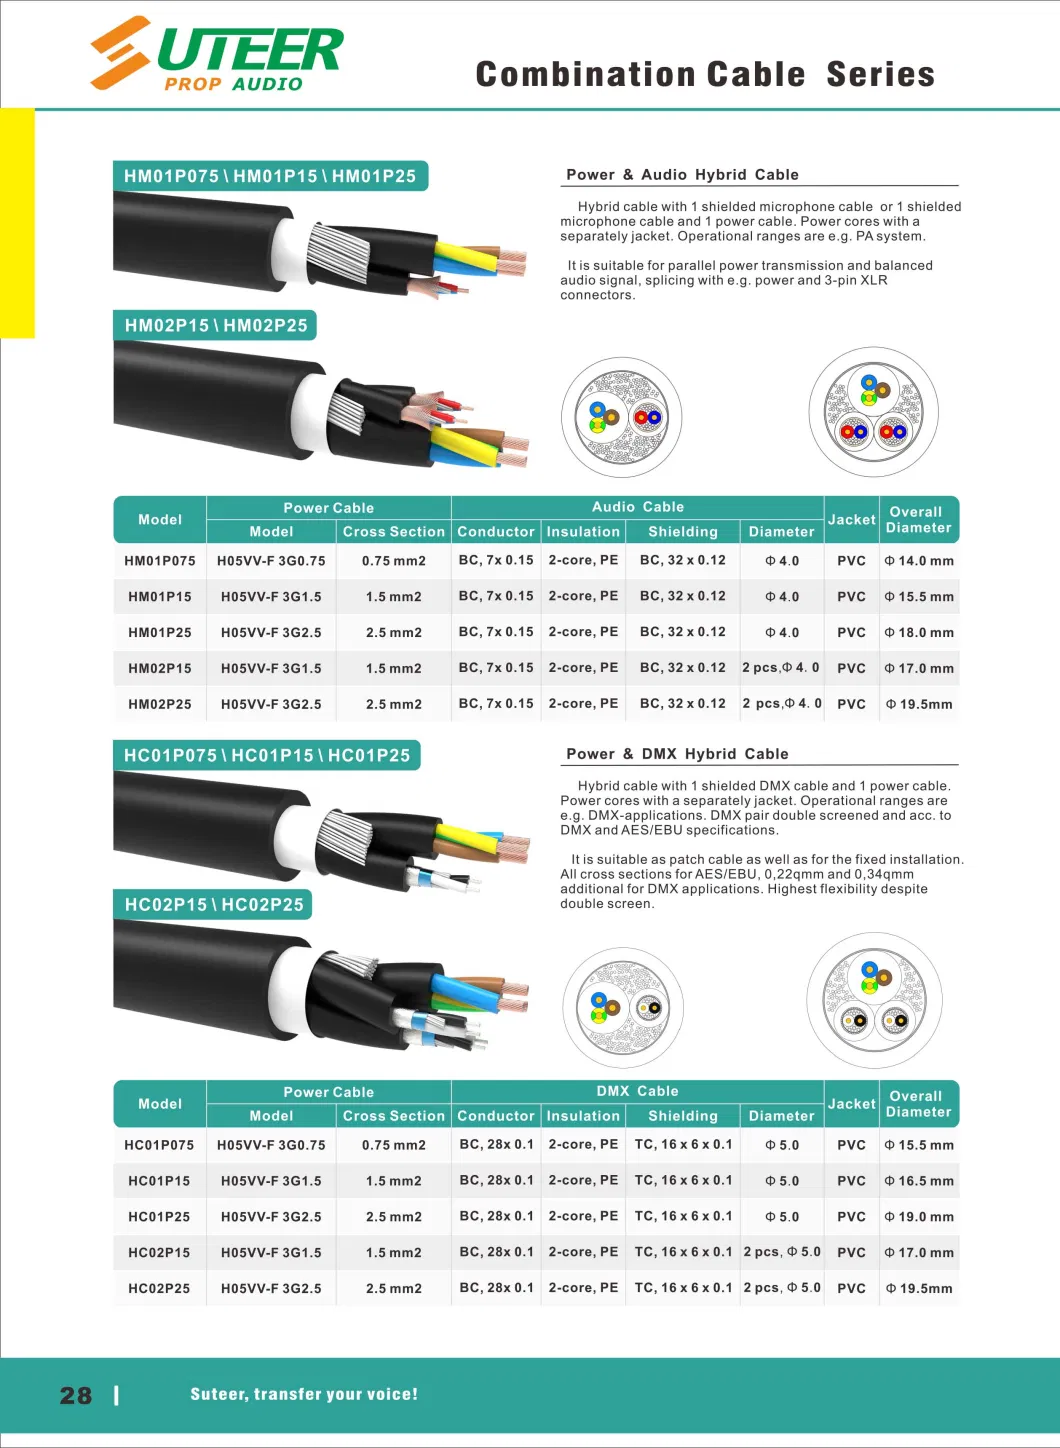 Hybrid Cable/Multicore Cable/Multipair Cable/Power &amp; DMX Combination Cable/Composite Cable/Fire Alarm Cable